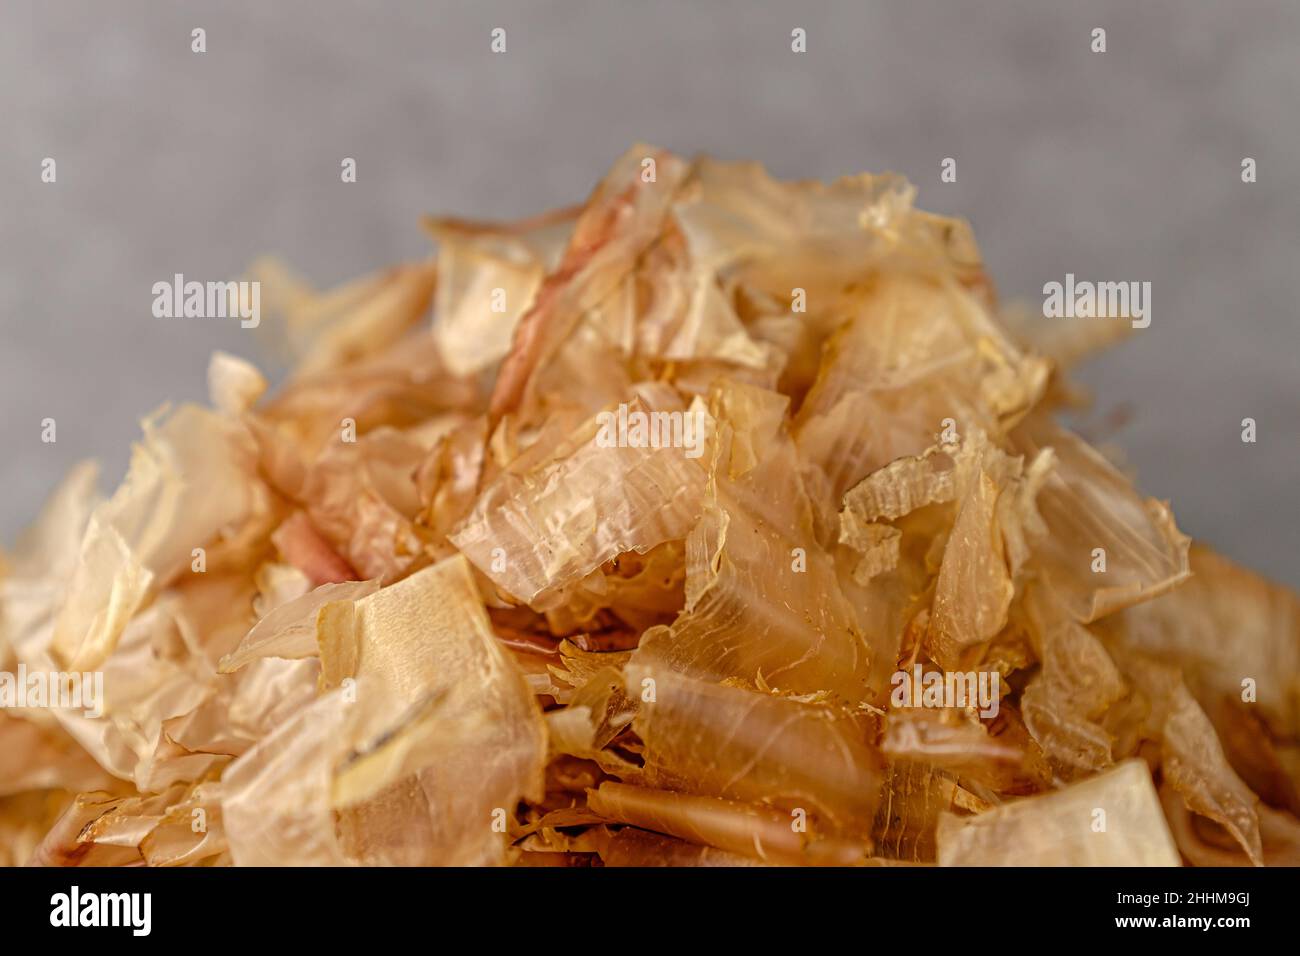 Ingredients made from skipjack tuna. dried fish. thinly sliced fish Stock Photo